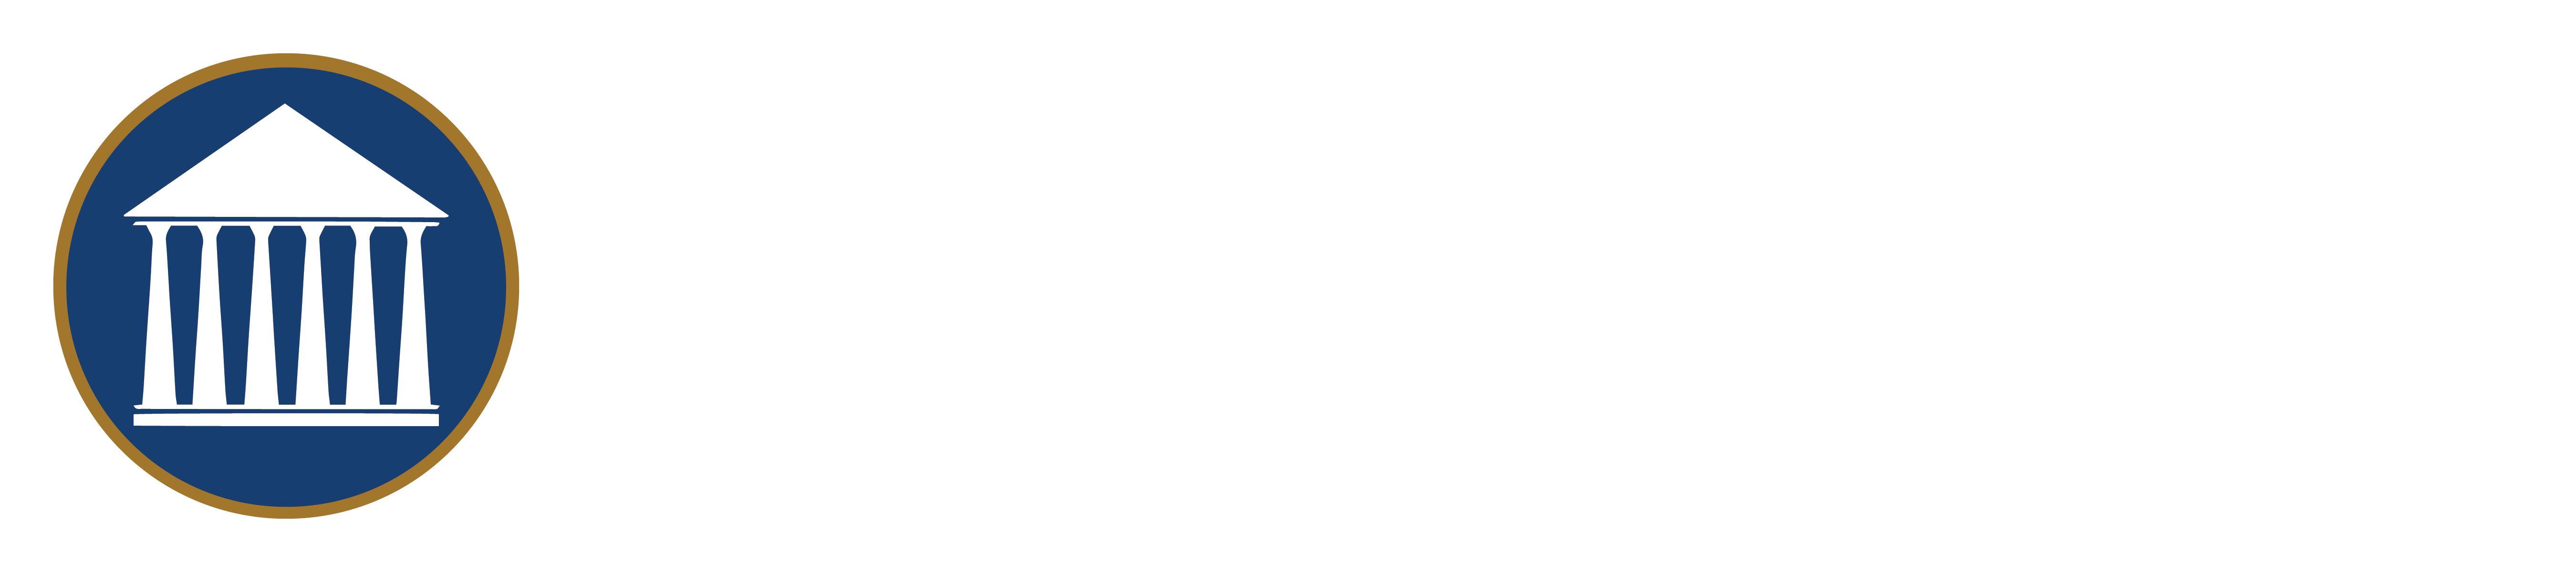 Global Value Investment Corporation